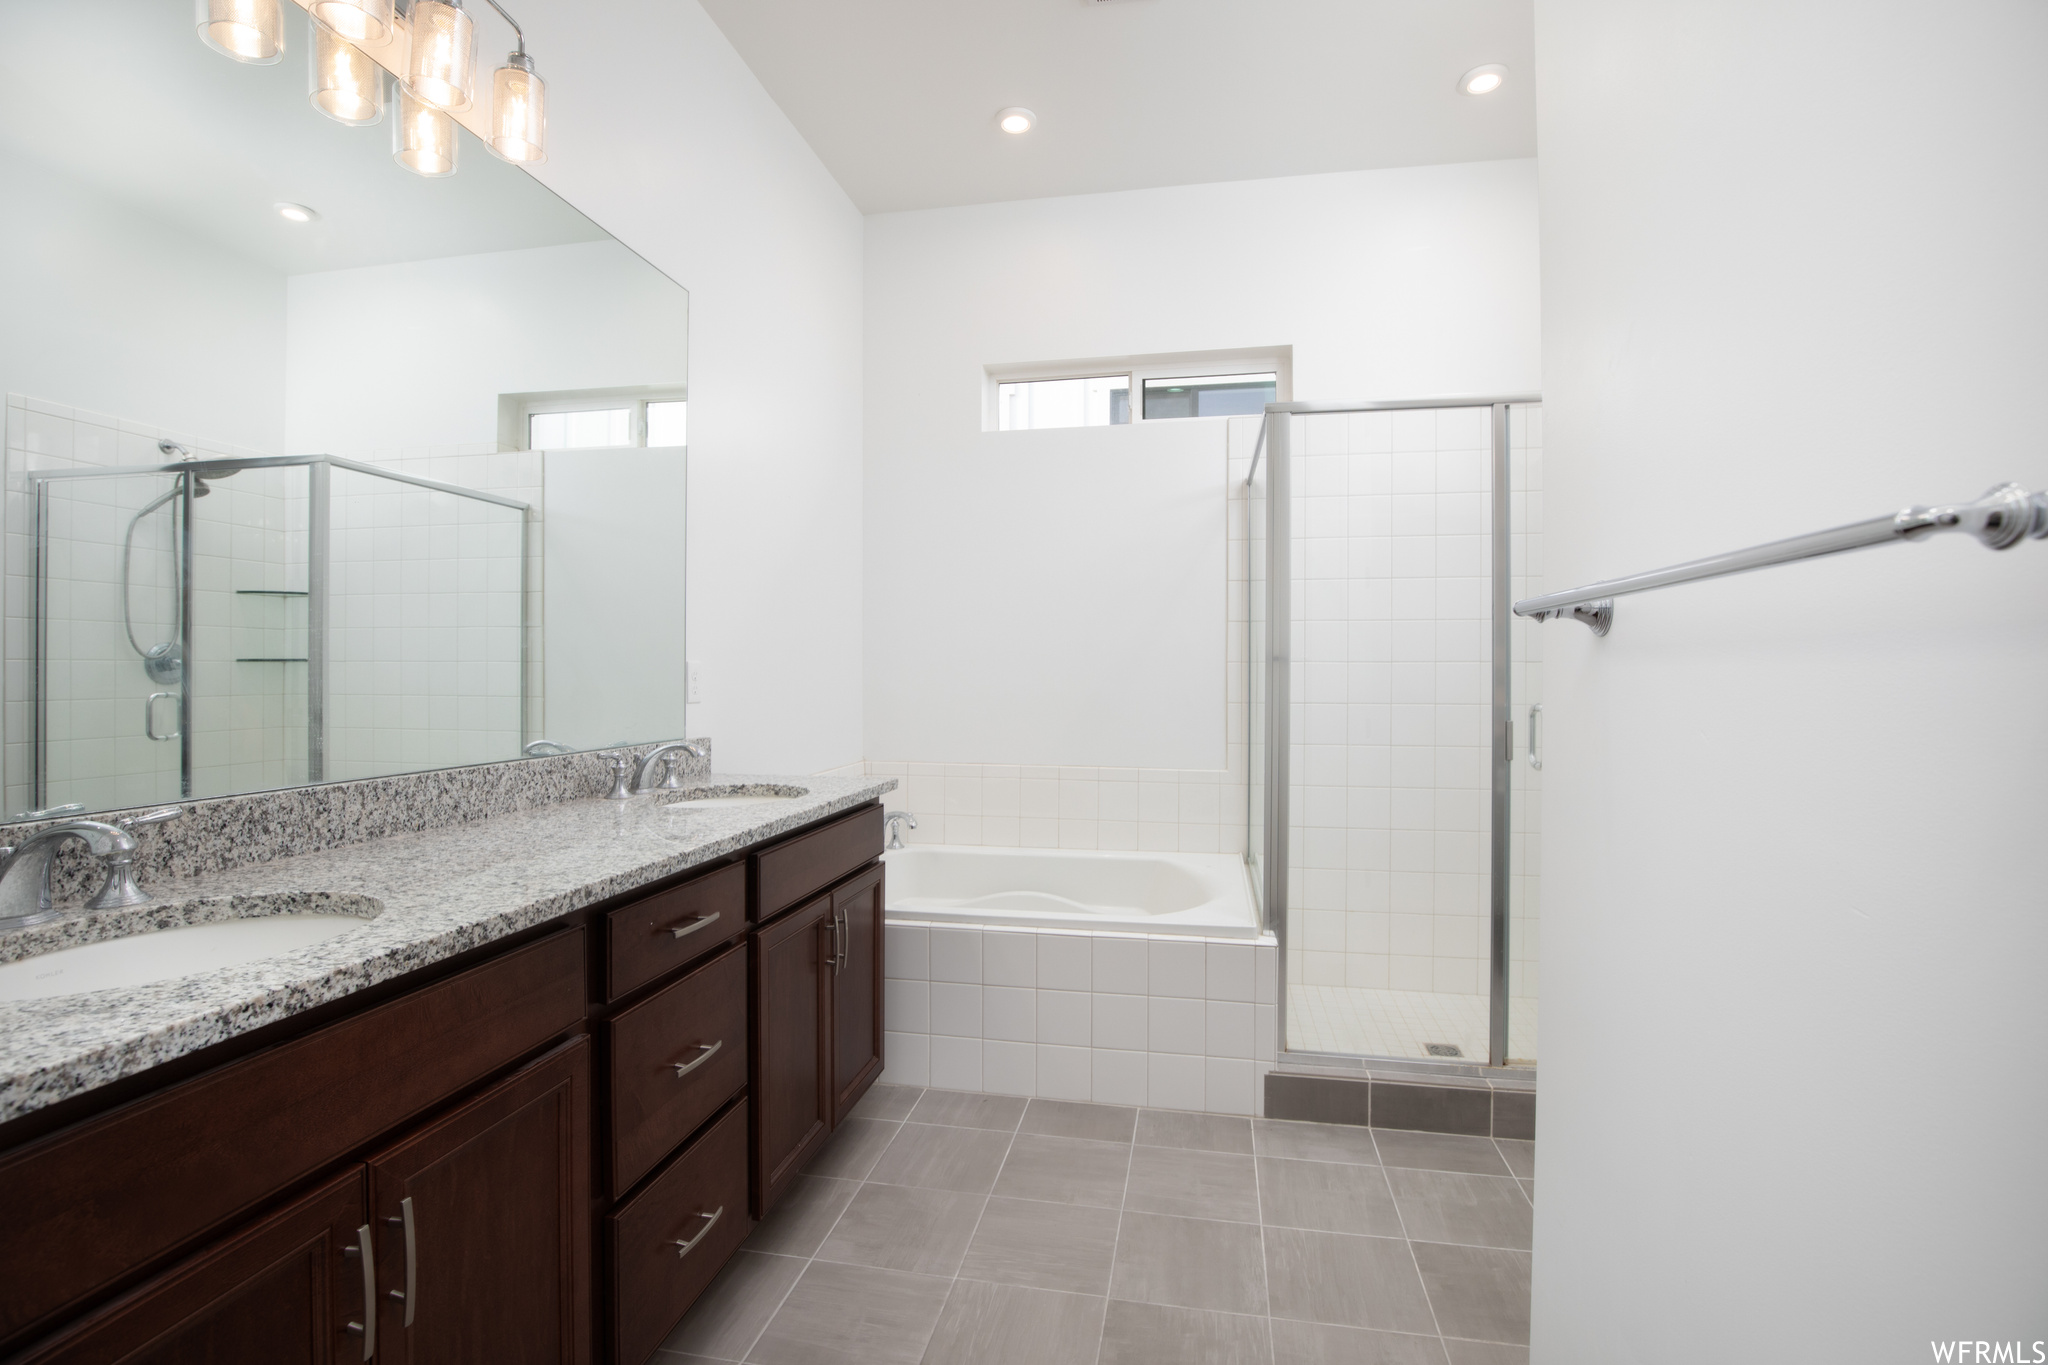 Bathroom featuring separate shower and tub, tile floors, oversized vanity, and dual sinks